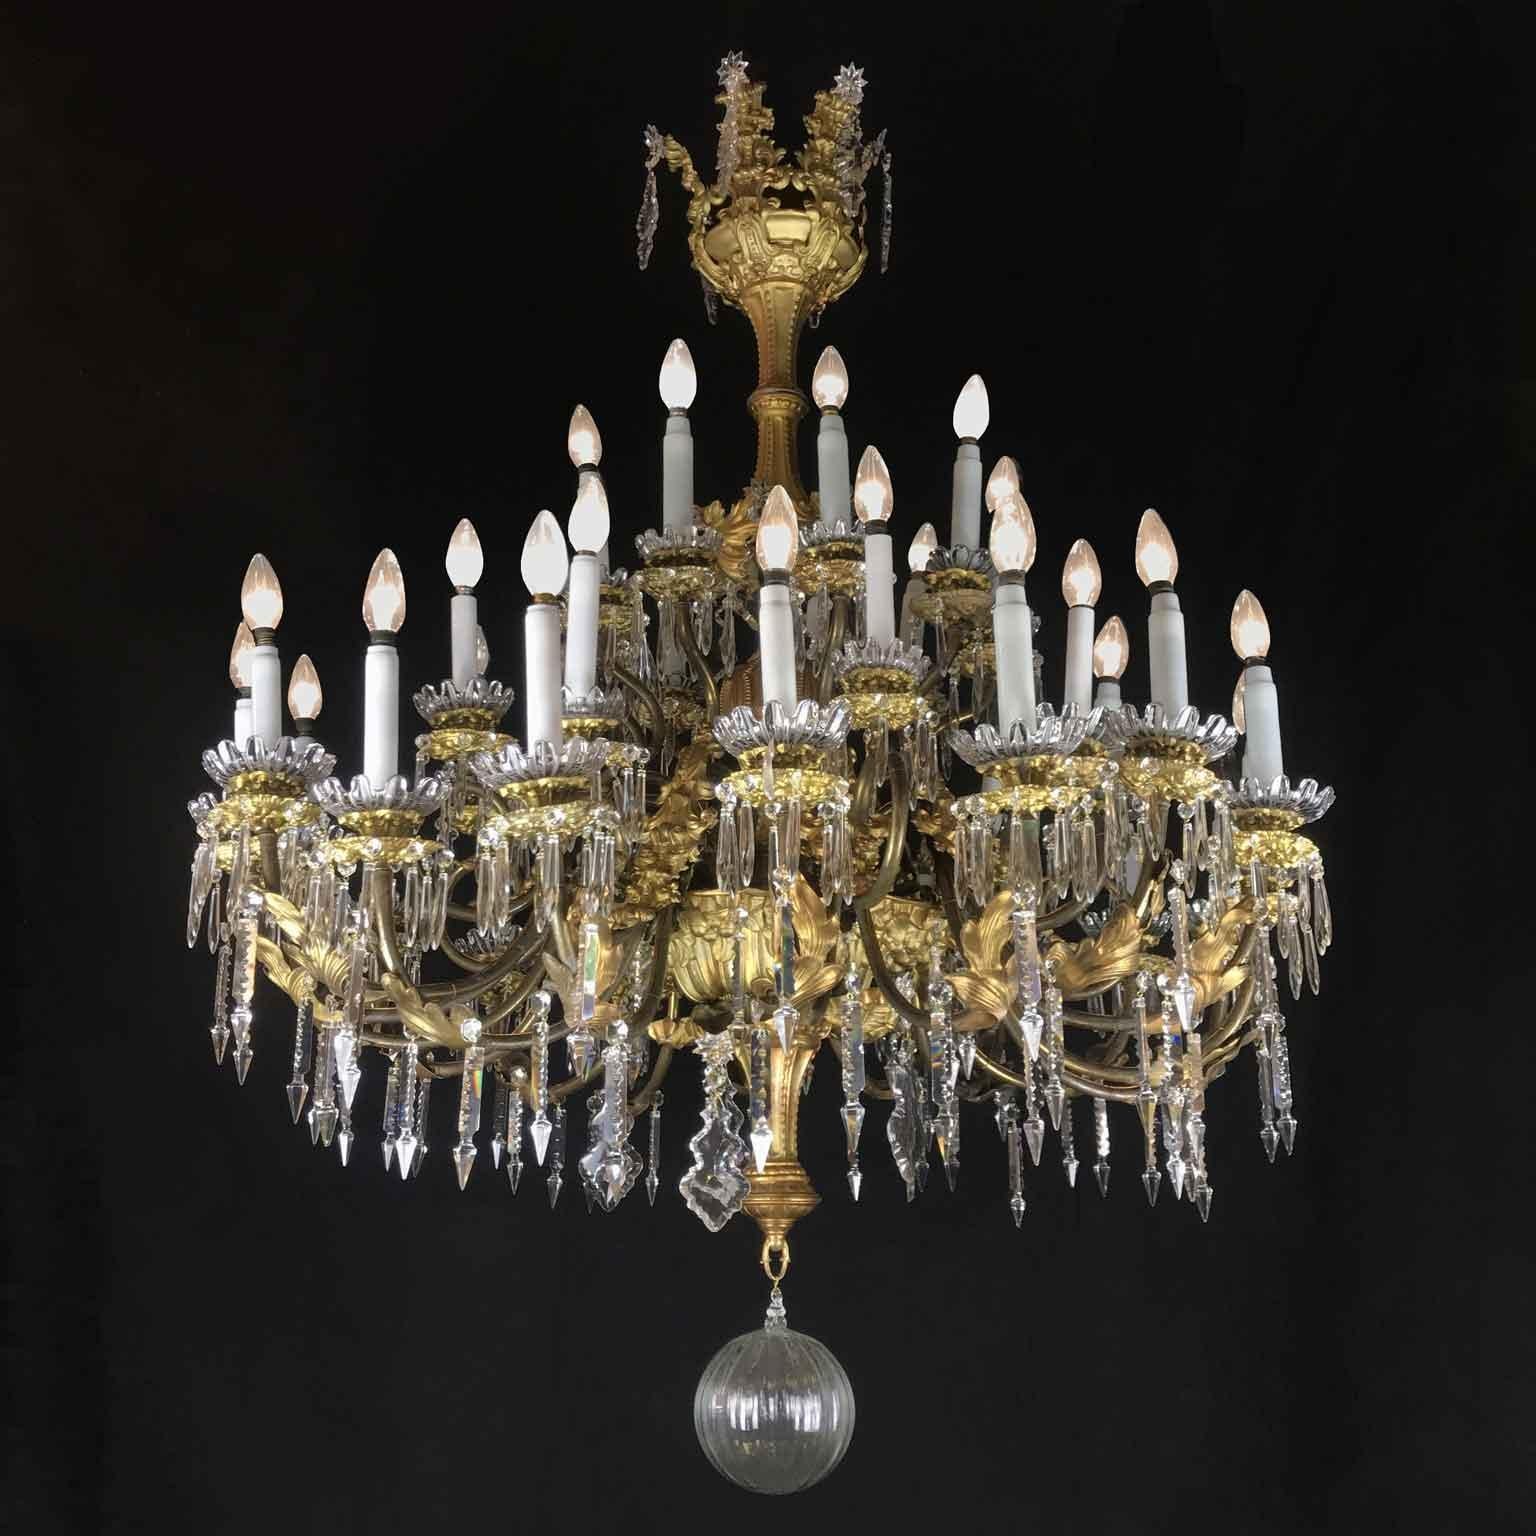 Monumental Italian antique chandelier, a 19th century gilt and crystal chandelier of Sicilian origin, a 36 lights, three-tiered repoussè and gilt brass leafted chandelier in good condition, ready to hang in your living room. This stunning antique